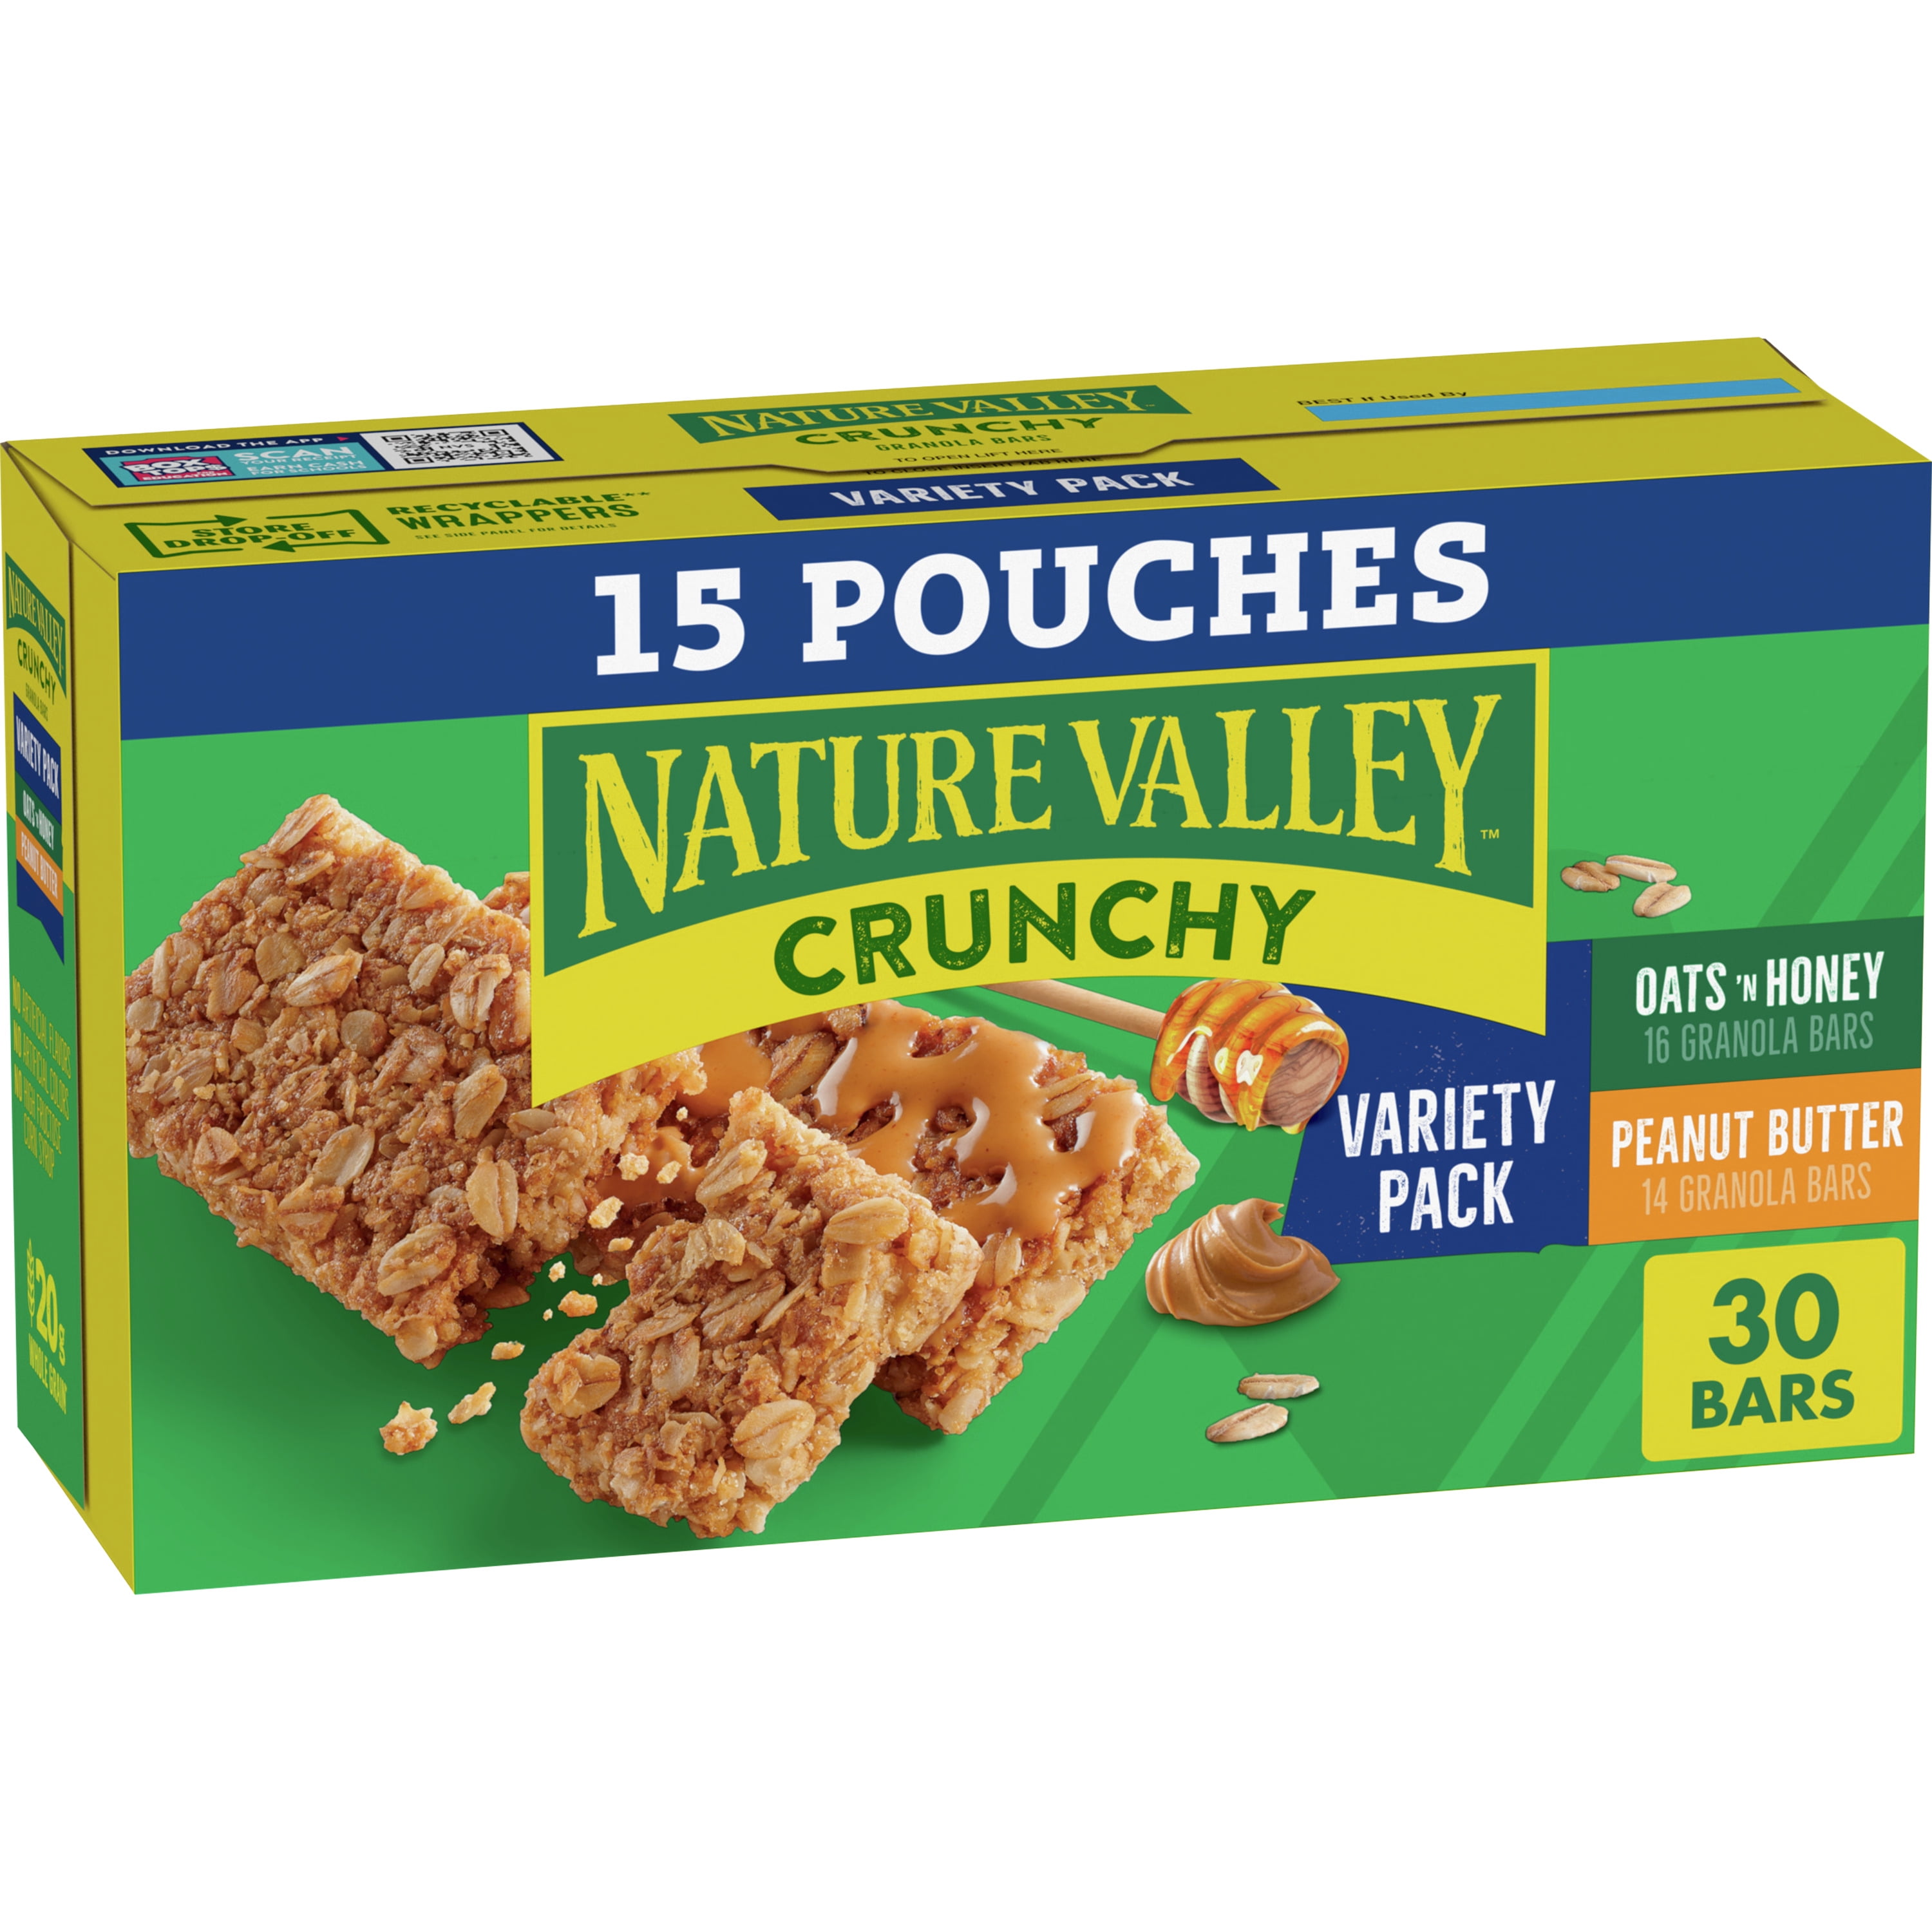 Nature Valley Crunchy Granola Bars Peanut Butter 5 Pack